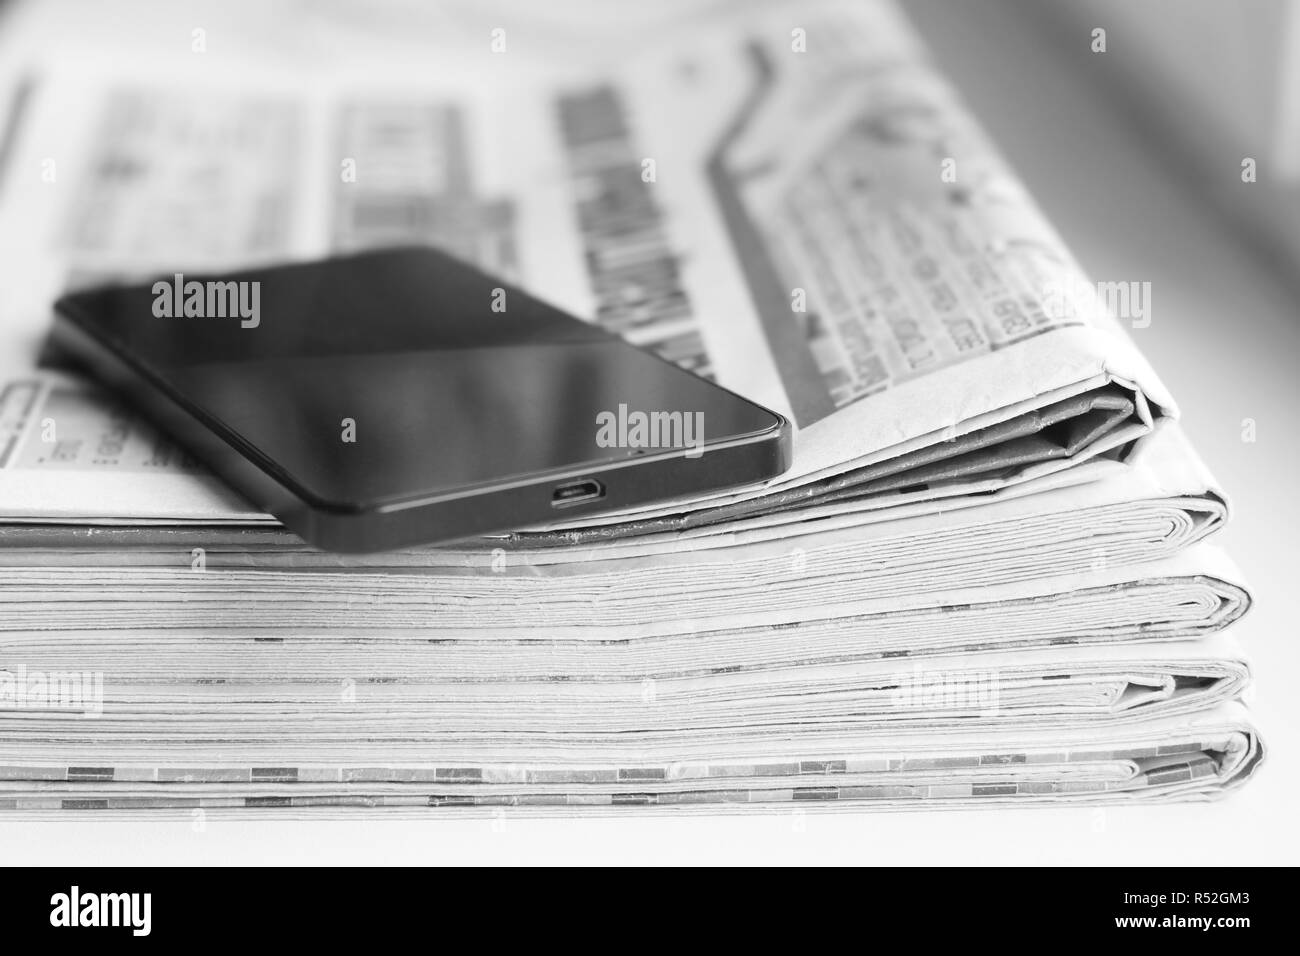 Newspaper and smartphone. Tabloid journals and cell phone - business concept. News magazines folded and stacked in pile and mobile gadget on the stack Stock Photo